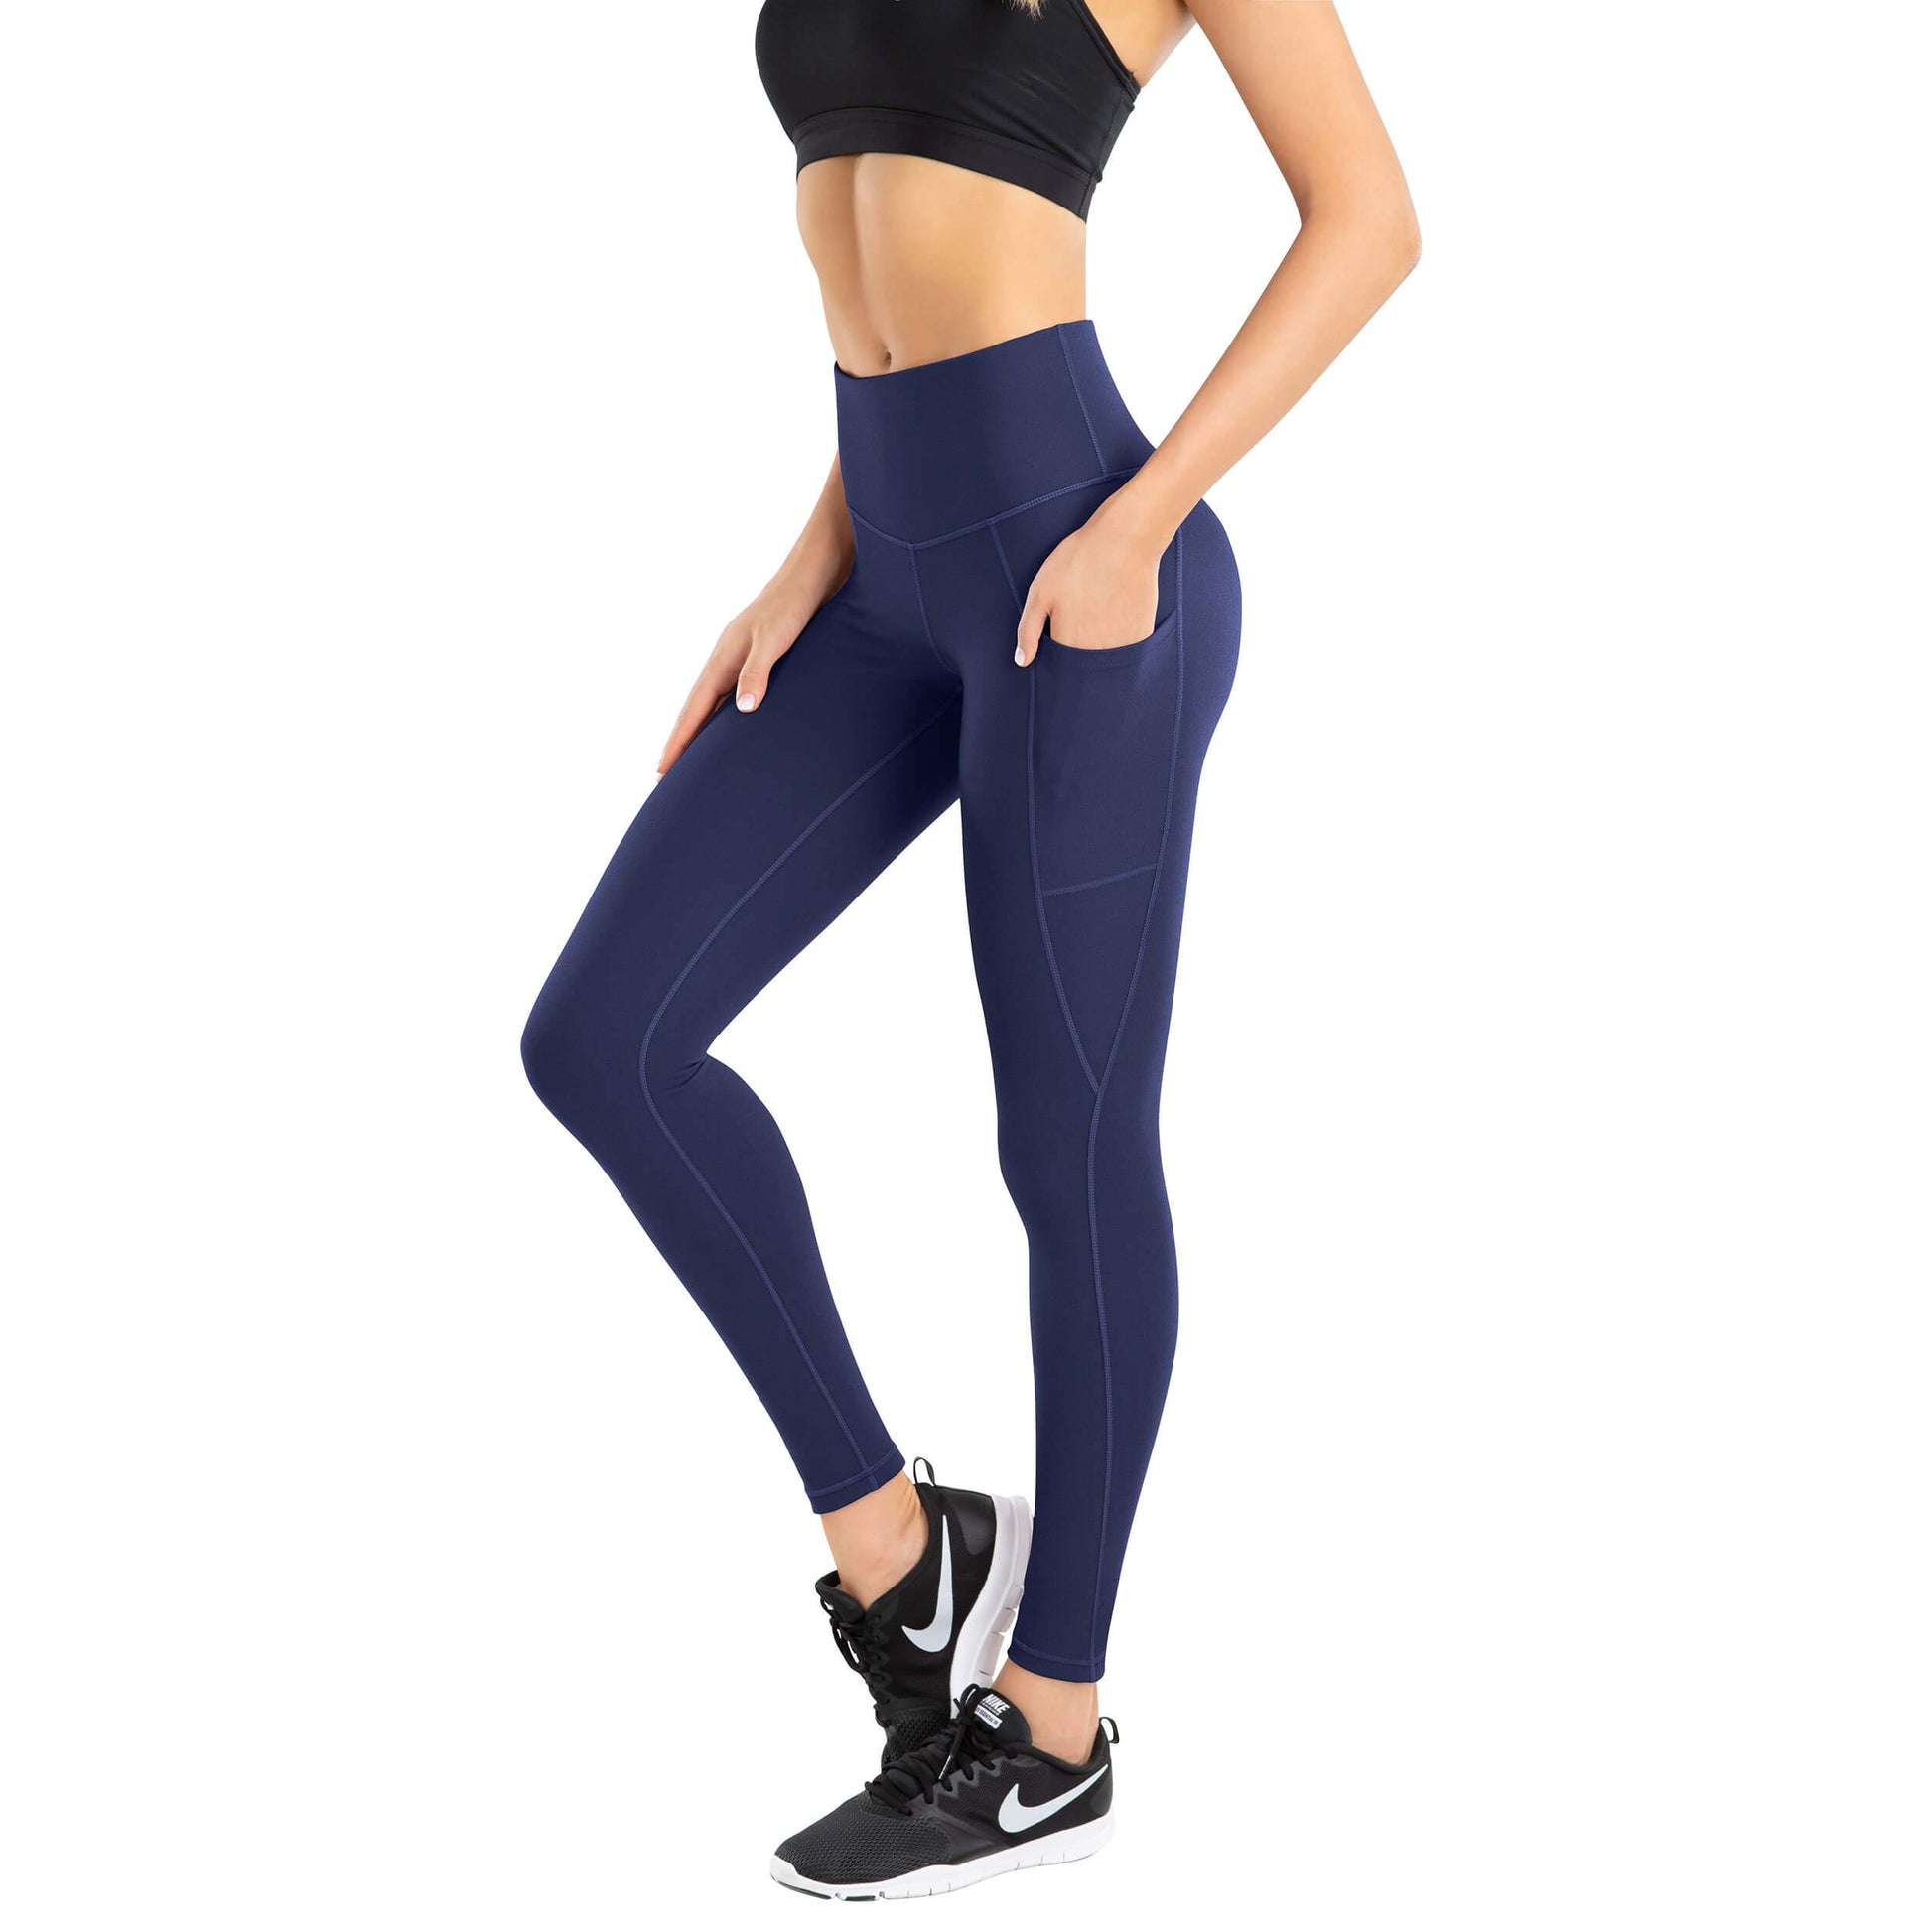 IUGA High Waisted Leggings for Women Workout Palestine